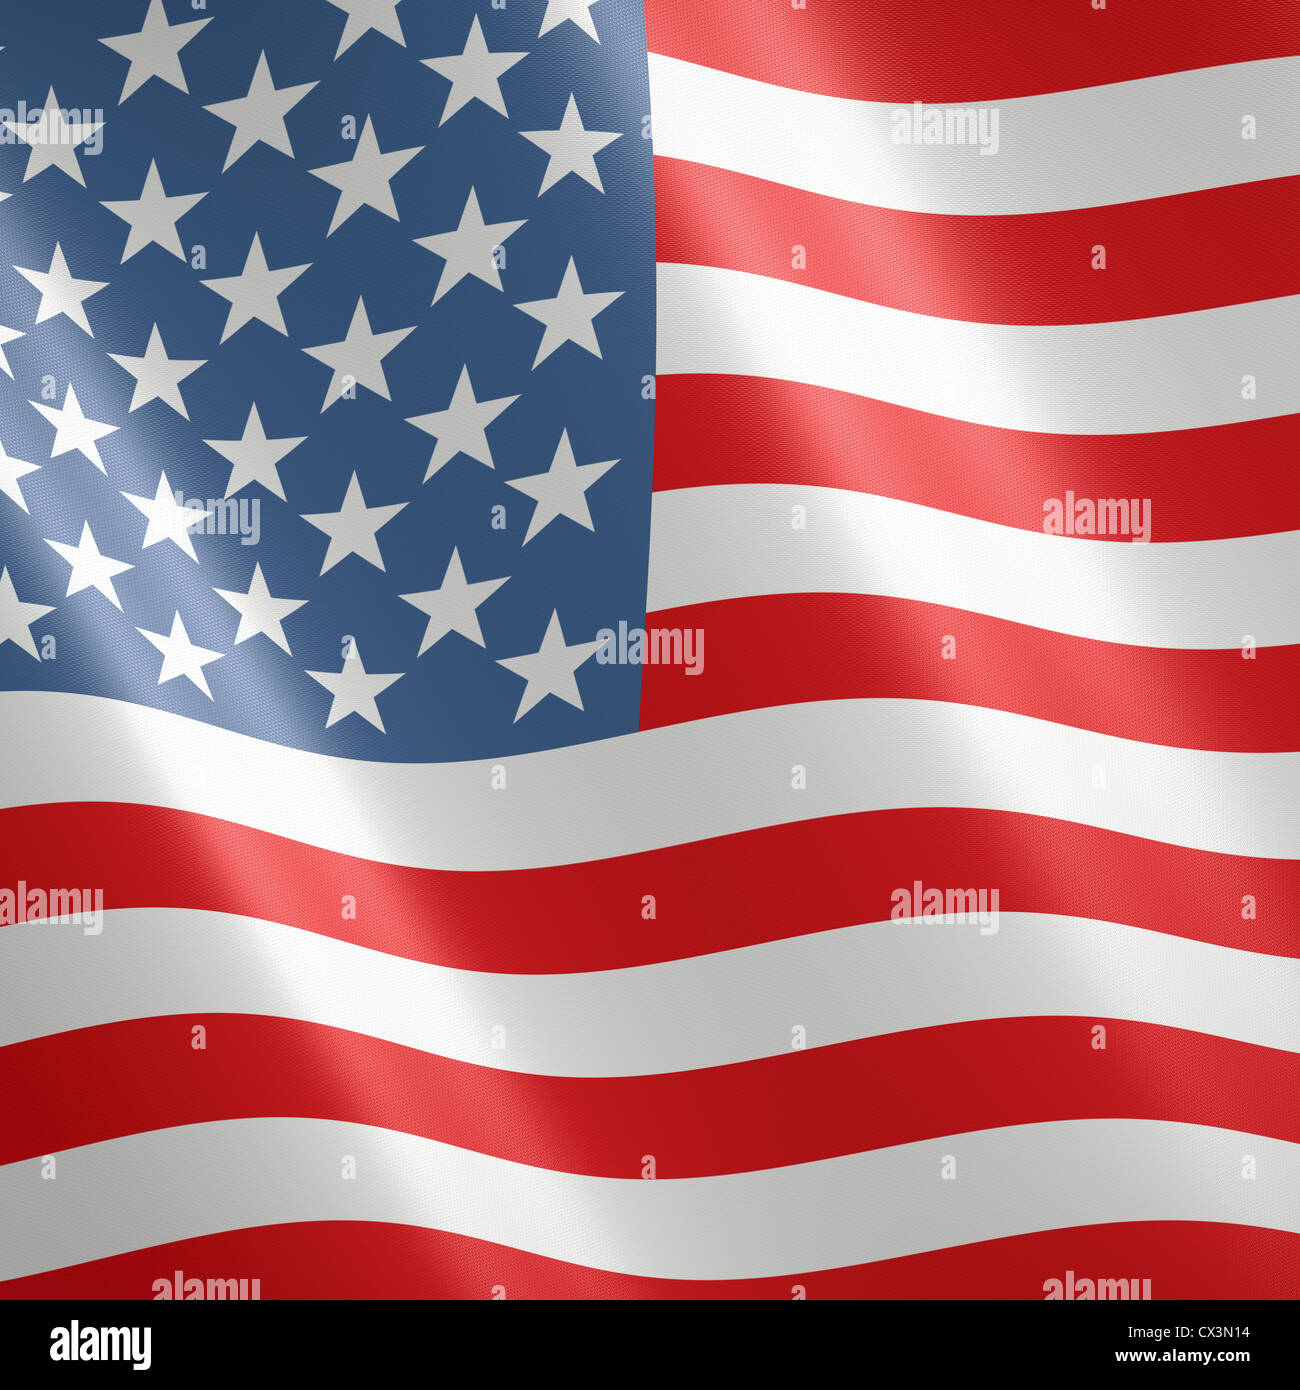 flag of the United States of America - Amerikanische oder US Fahne / Flagge Stock Photo